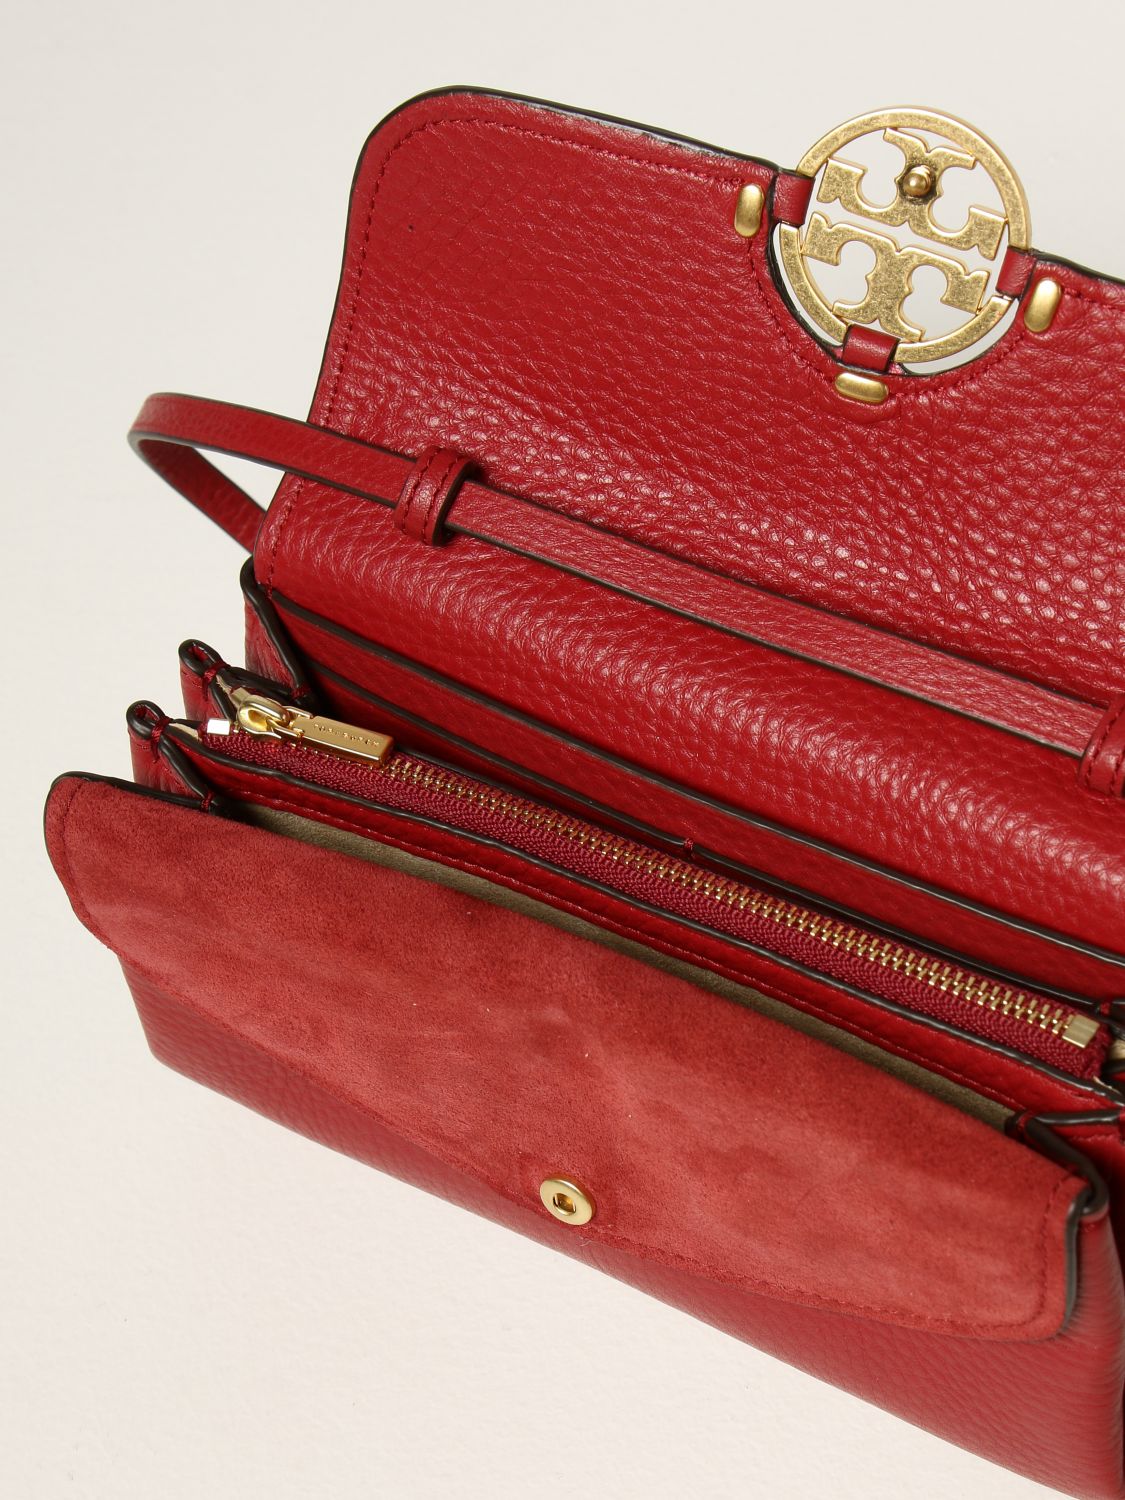 TORY BURCH: Miller bag in grained leather with emblem - Red | Tory Burch  mini bag 80808 online on 